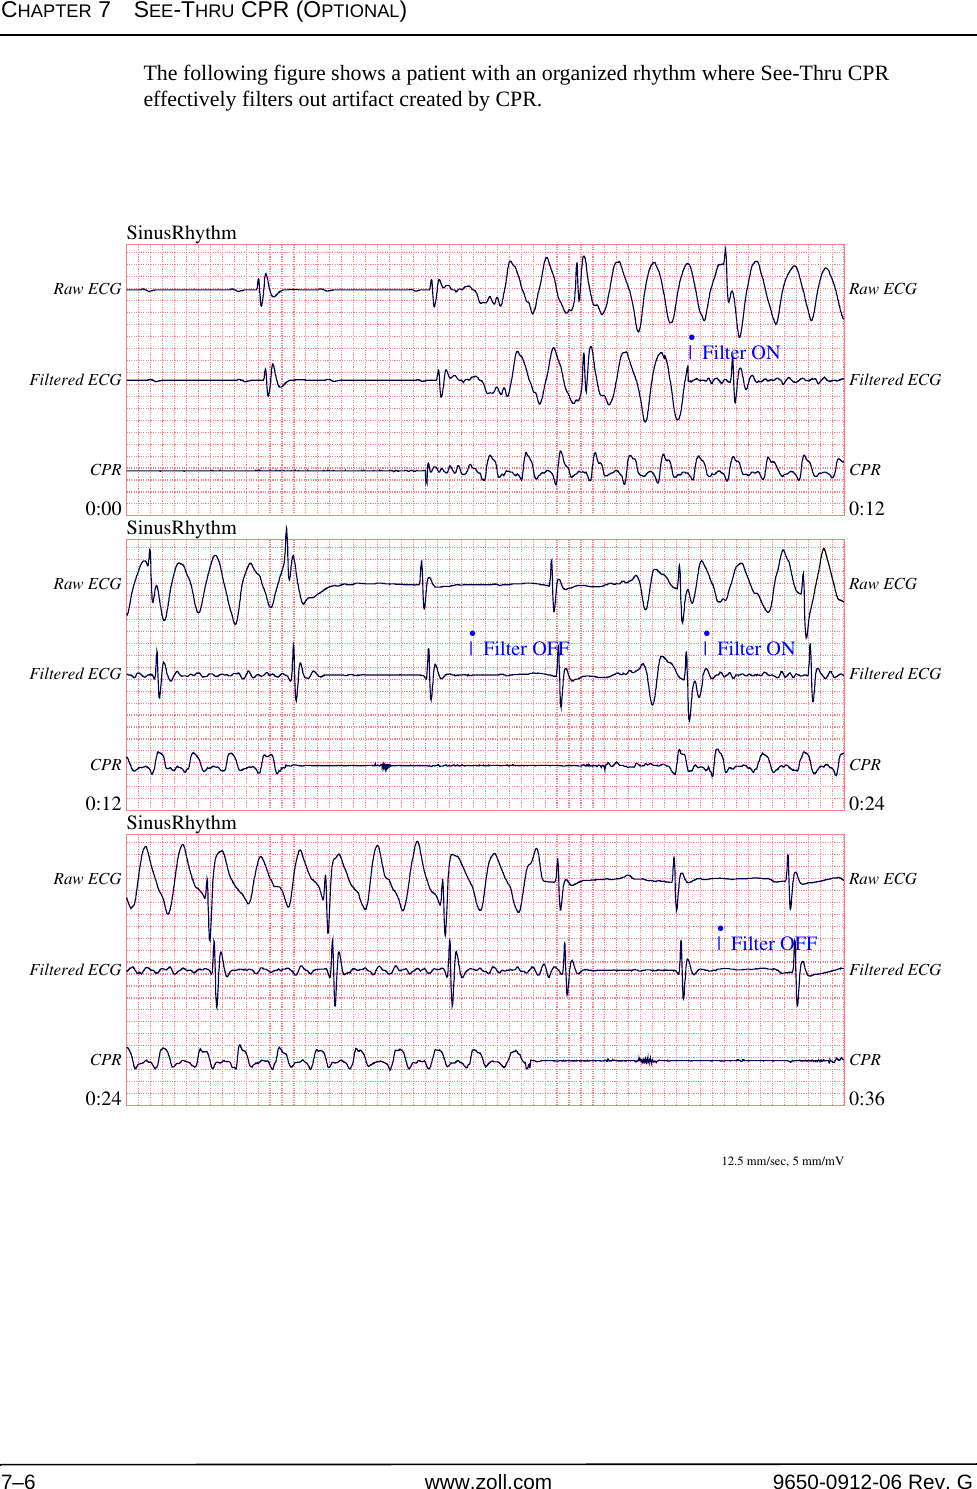 CHAPTER 7SEE-THRU CPR (OPTIONAL)7–6 www.zoll.com 9650-0912-06 Rev. GThe following figure shows a patient with an organized rhythm where See-Thru CPR effectively filters out artifact created by CPR.SinusRhythm0:00 0:12Raw ECG Raw ECGFiltered ECG Filtered ECGCPR CPR|  Filter ON•SinusRhythm0:12 0:24Raw ECG Raw ECGFiltered ECG Filtered ECGCPR CPR|  Filter OFF•|  Filter ON•SinusRhythm0:24 0:36Raw ECG Raw ECGFiltered ECG Filtered ECGCPR CPR|  Filter OFF•12.5 mm/sec, 5 mm/mV